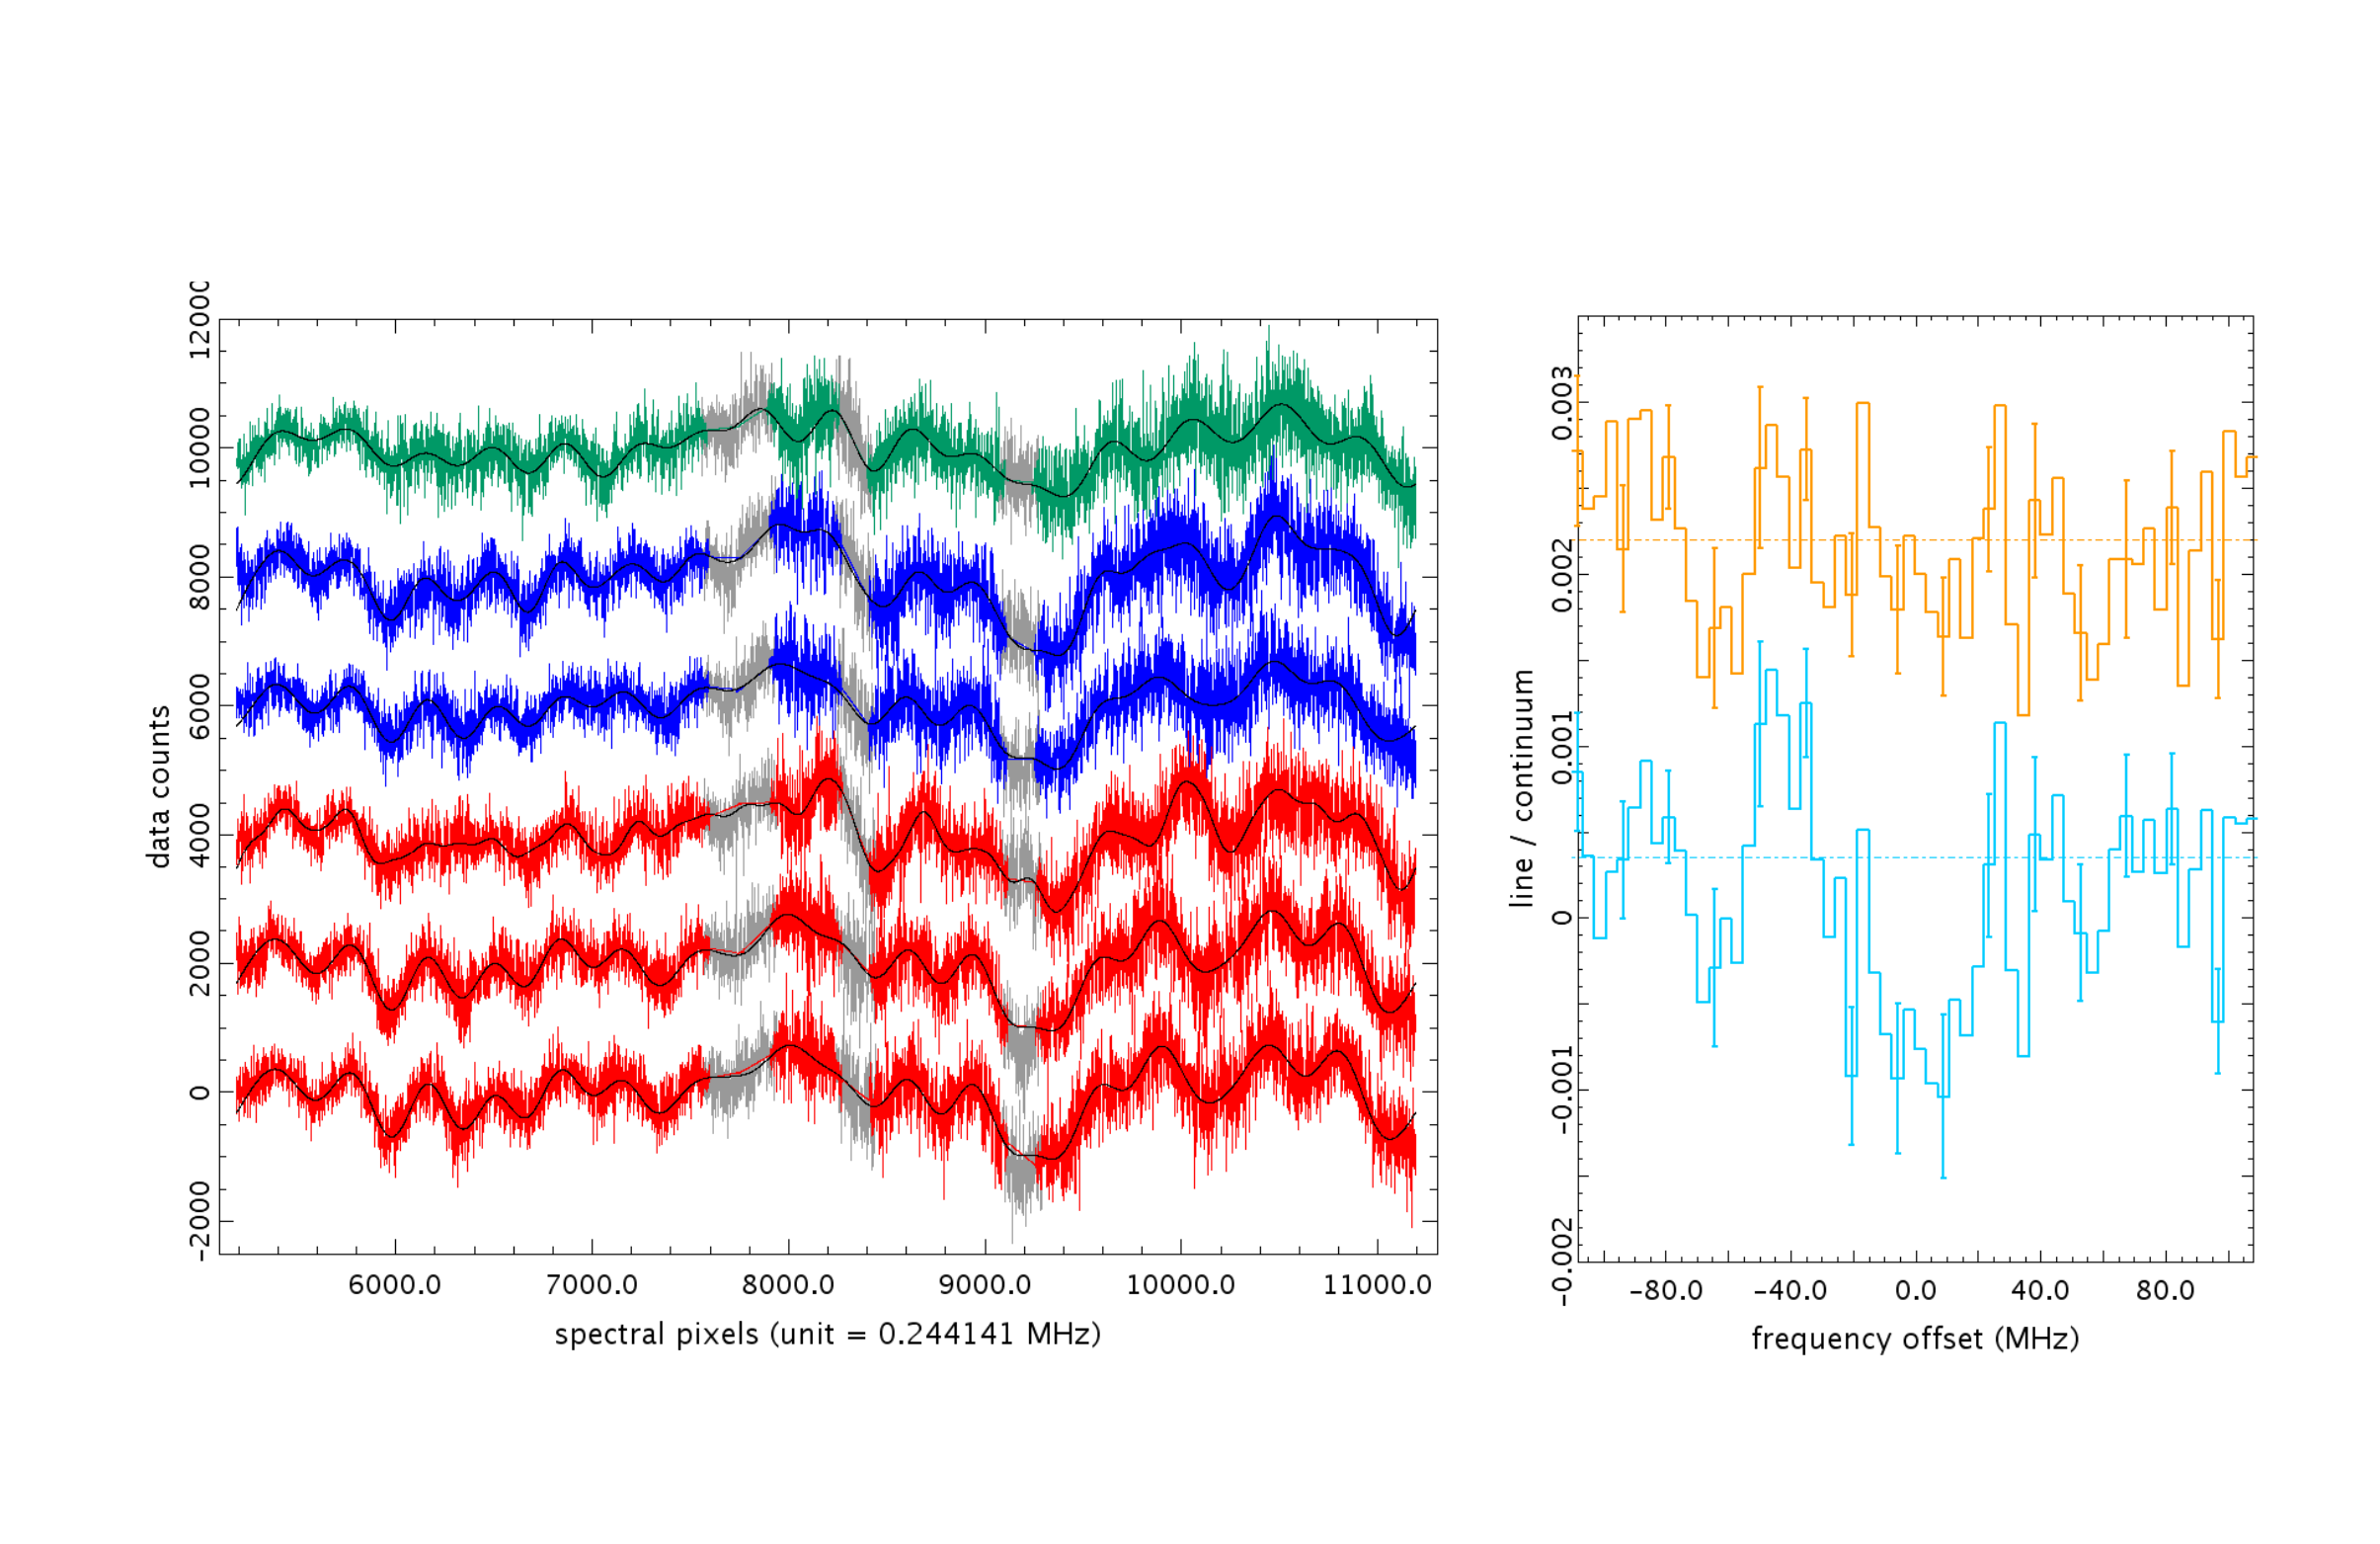 Recovery of Phosphine In Venus’ Atmosphere From SOFIA Observations